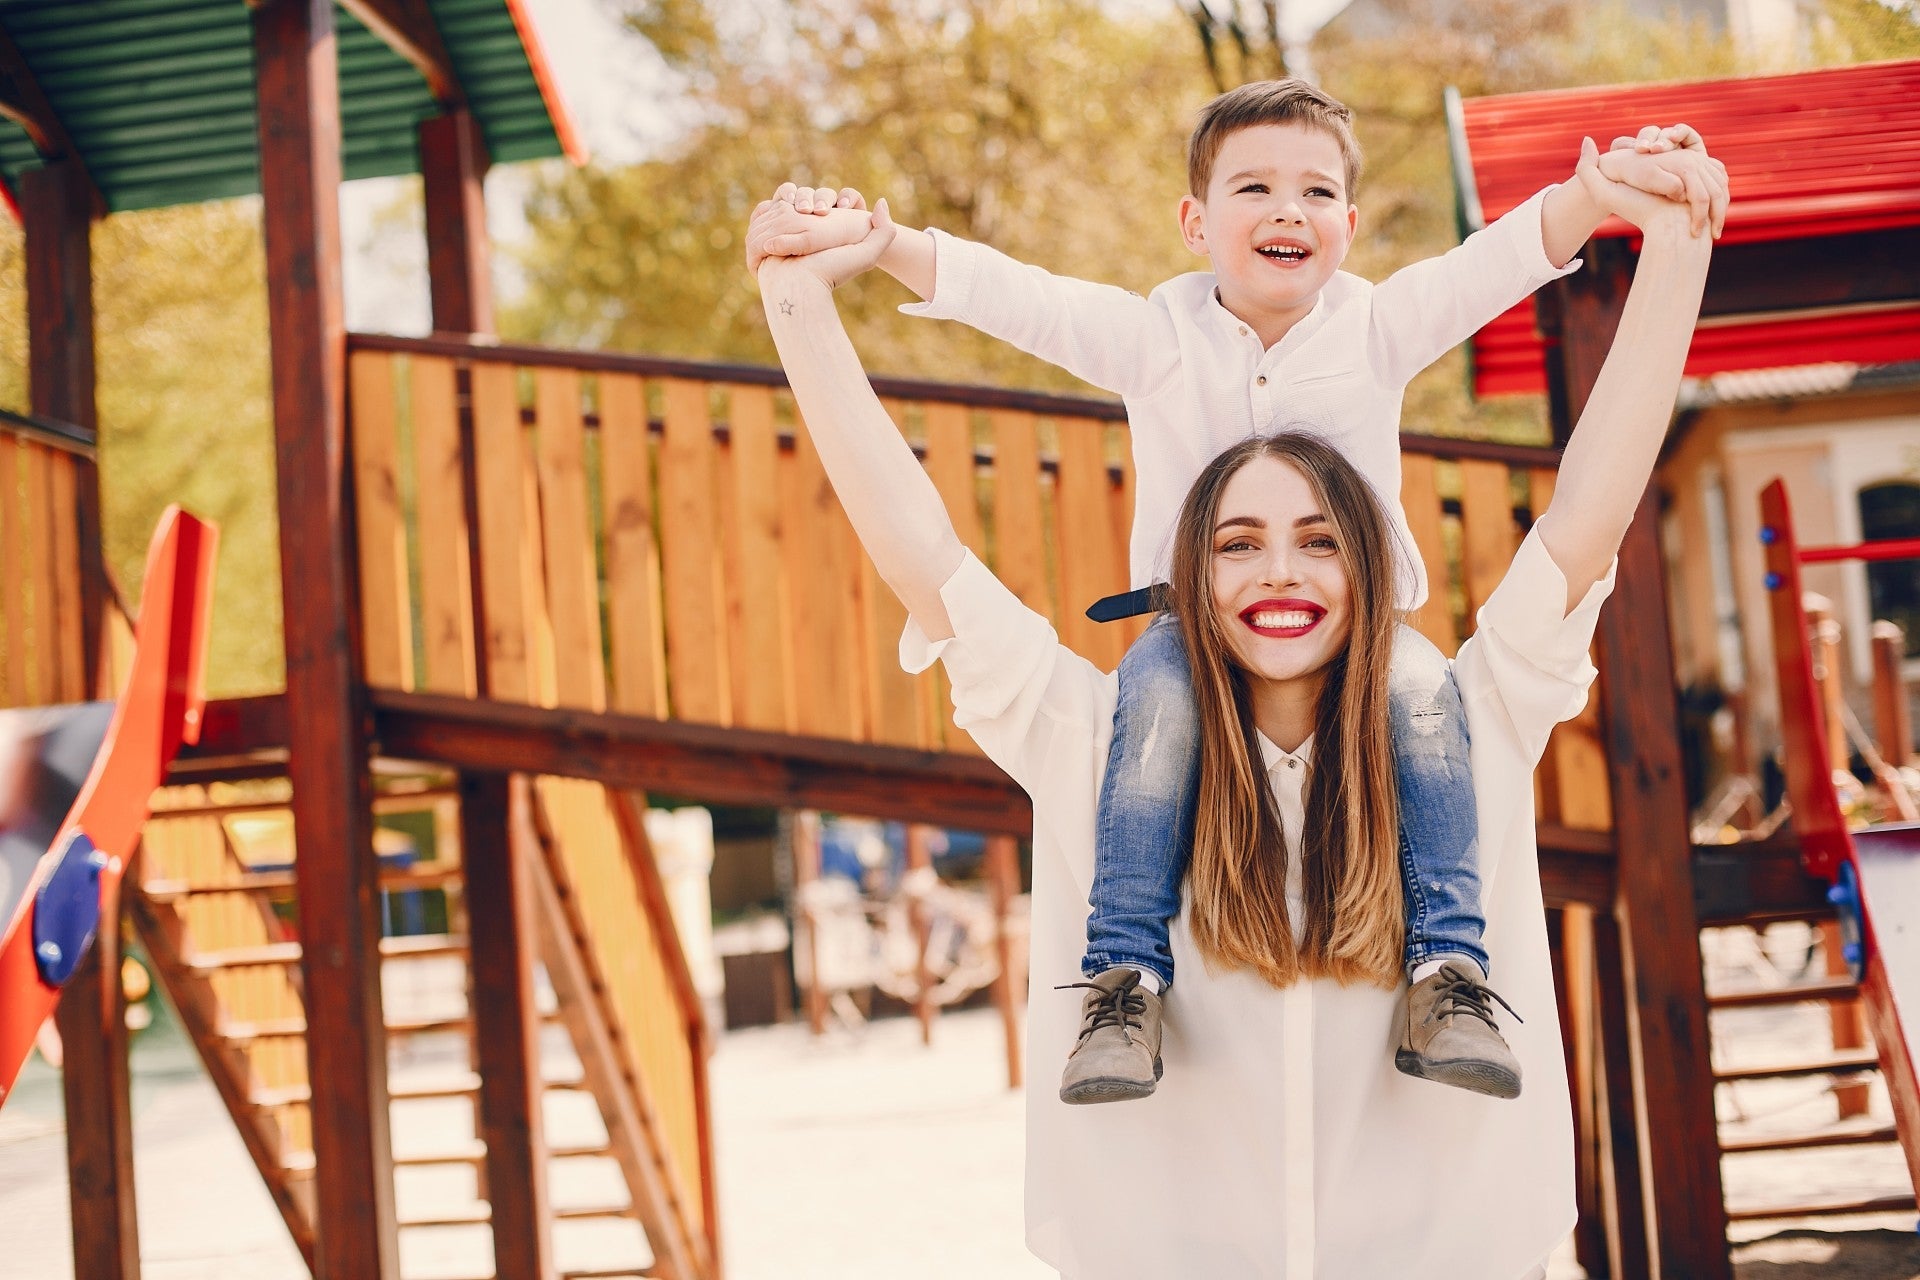 14 Fun Activities to Do at a Park - Simplified Playgrounds